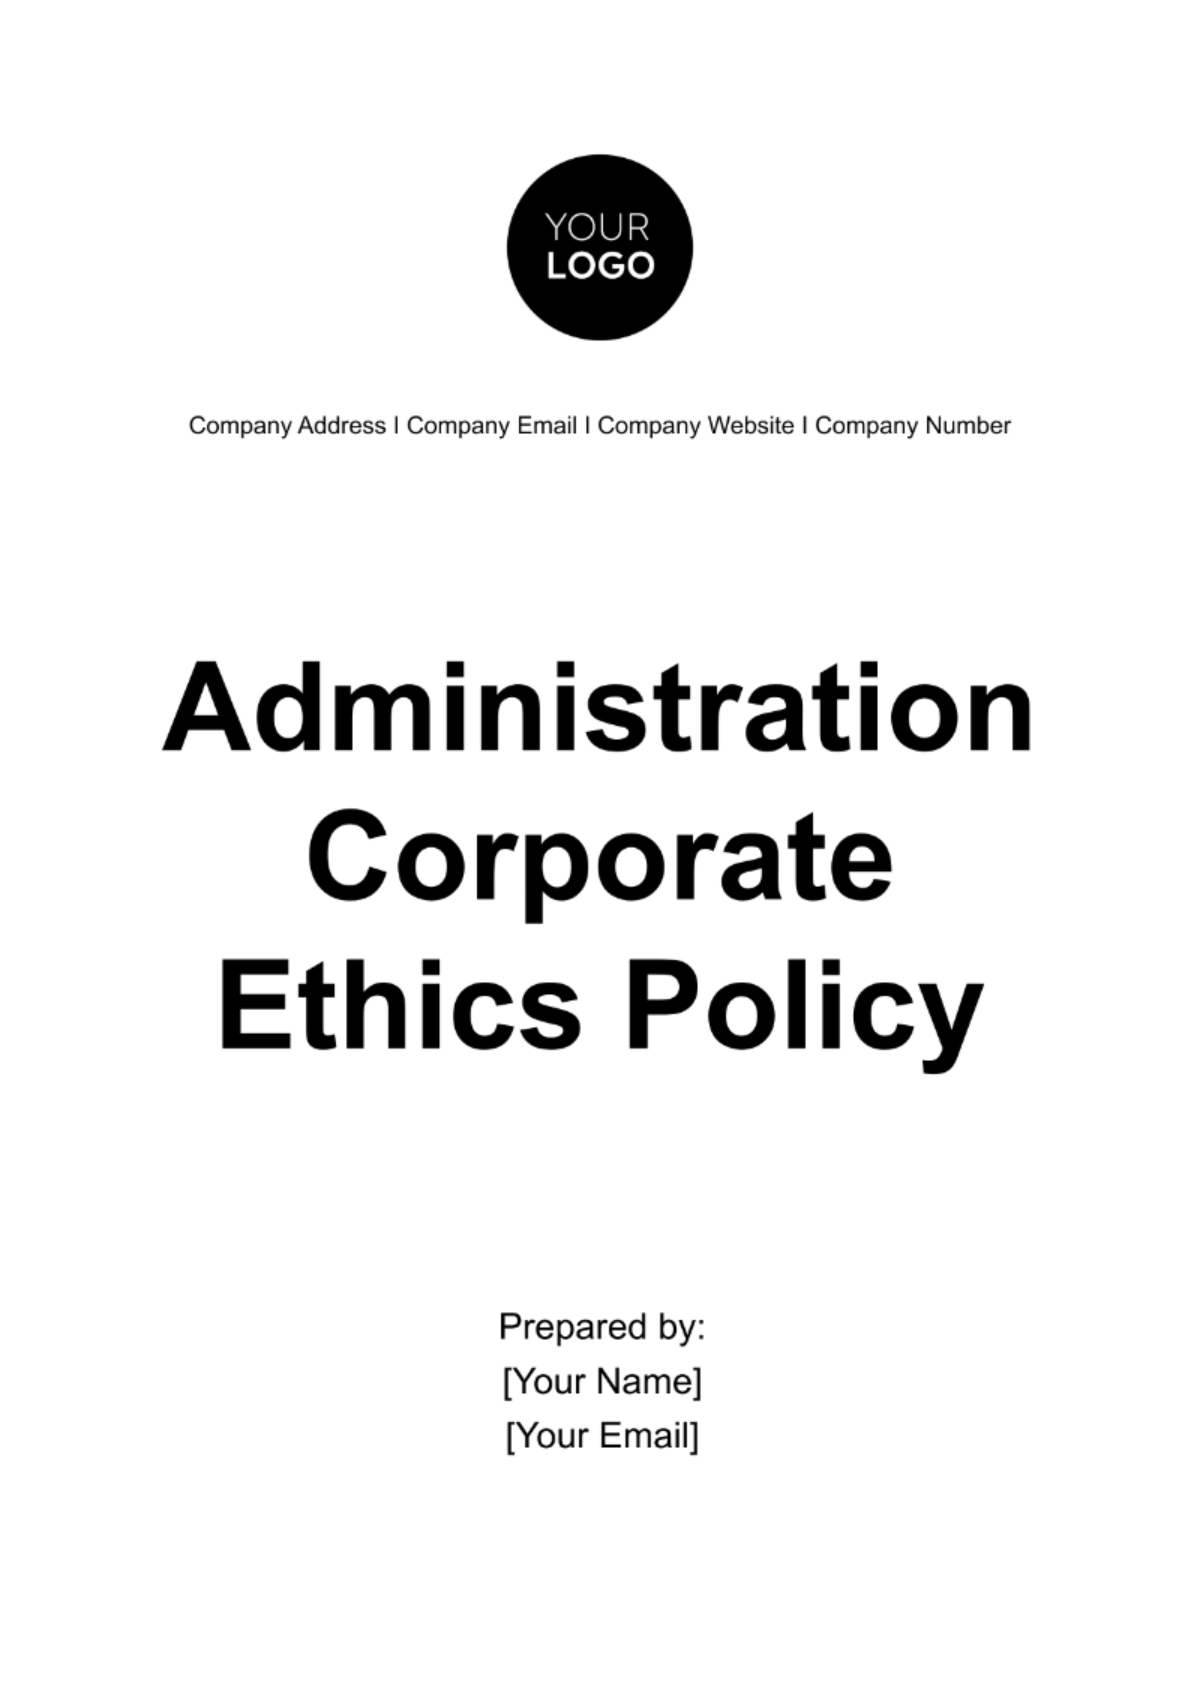 Administration Corporate Ethics Policy Template